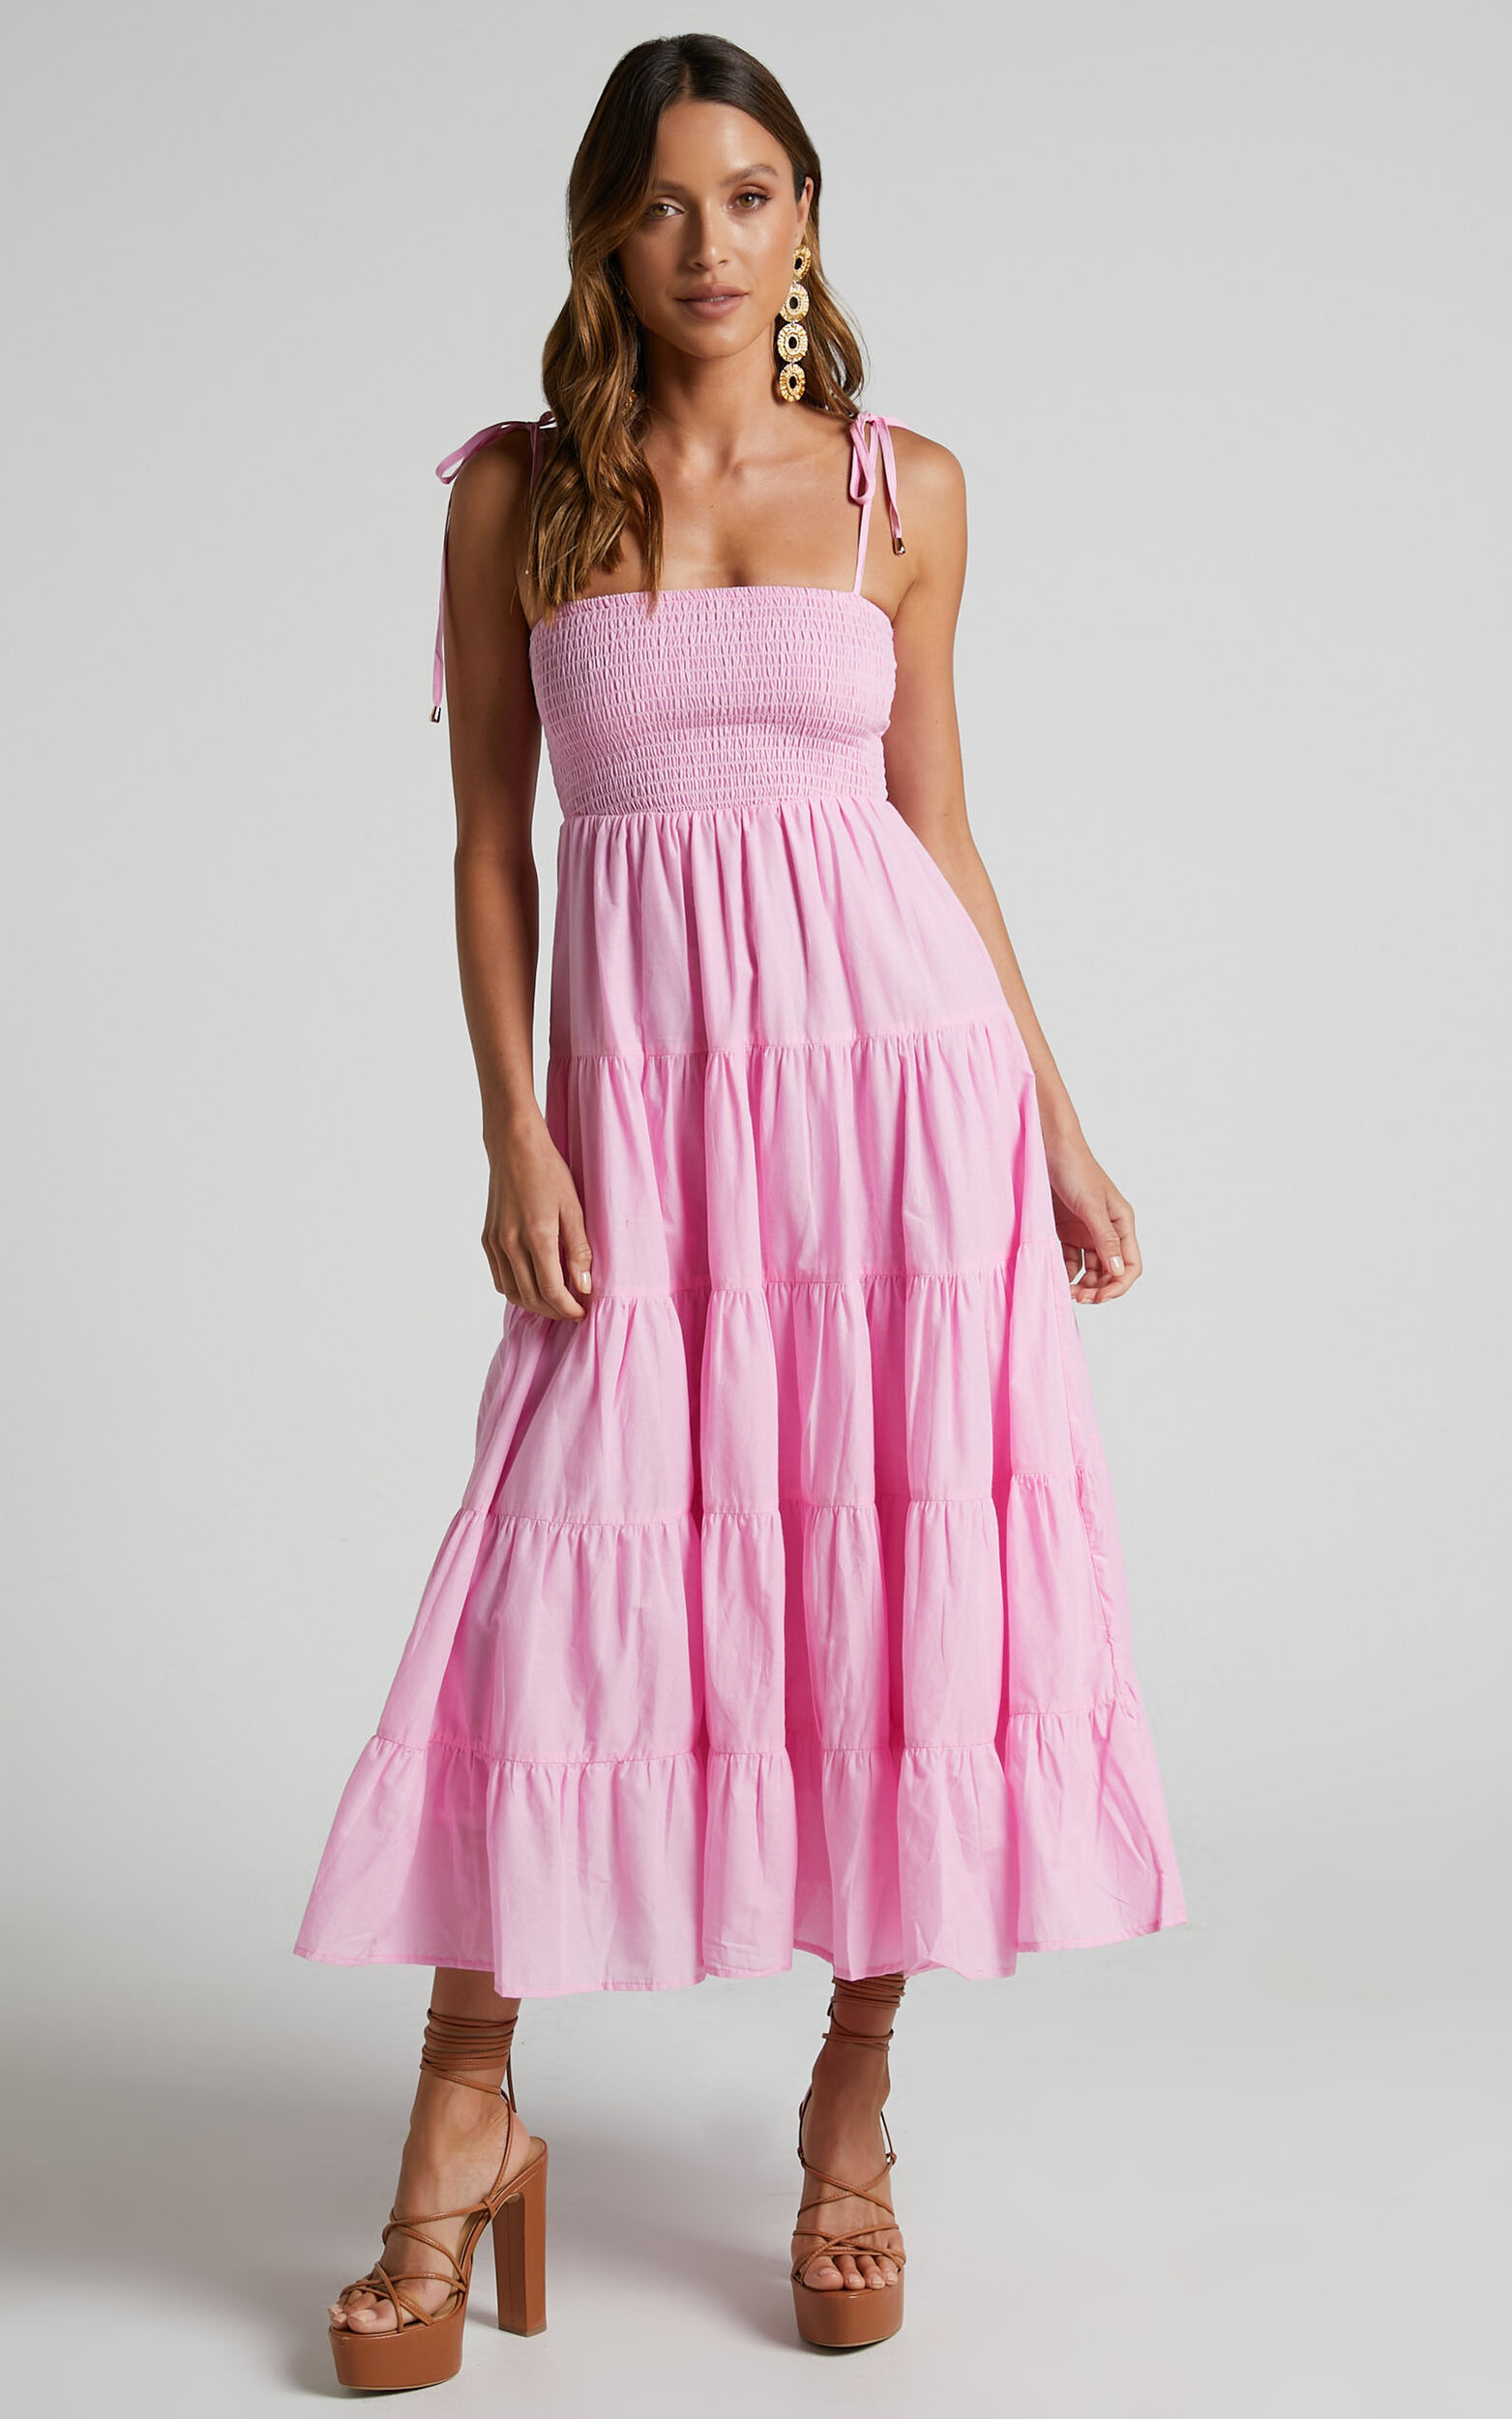 Ayla Midi Dress - Tie Up Strap Tiered Dress in Candy Pink | Showpo